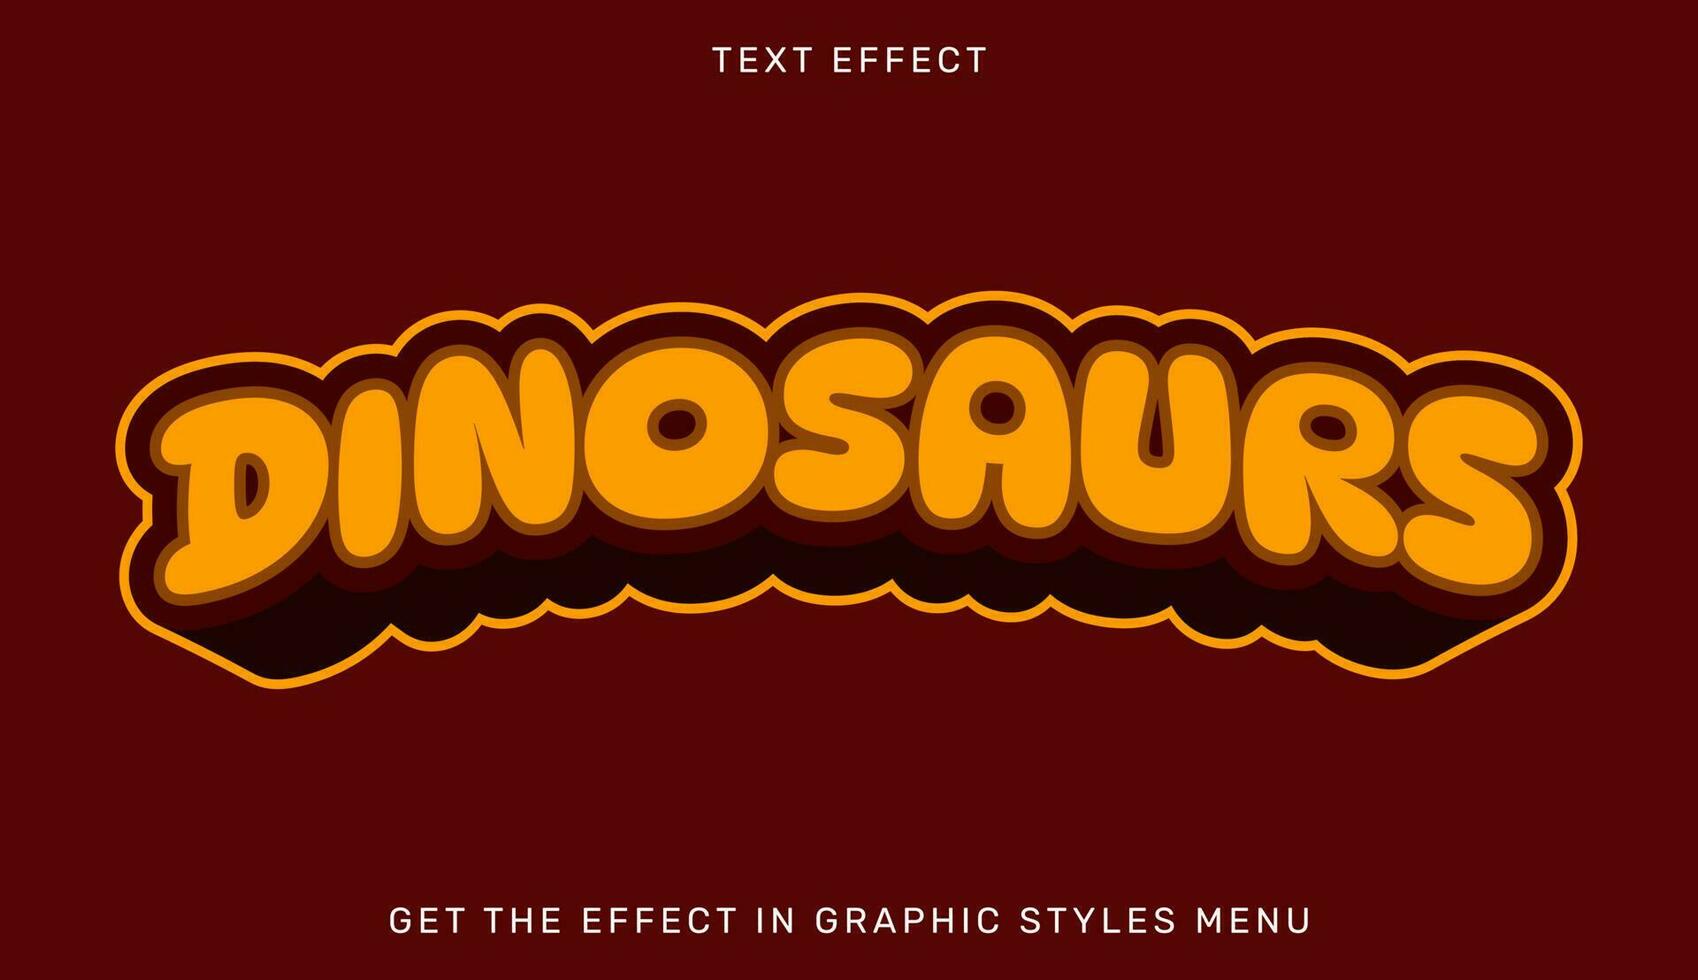 Dinosaurs editable text effect in 3d style vector